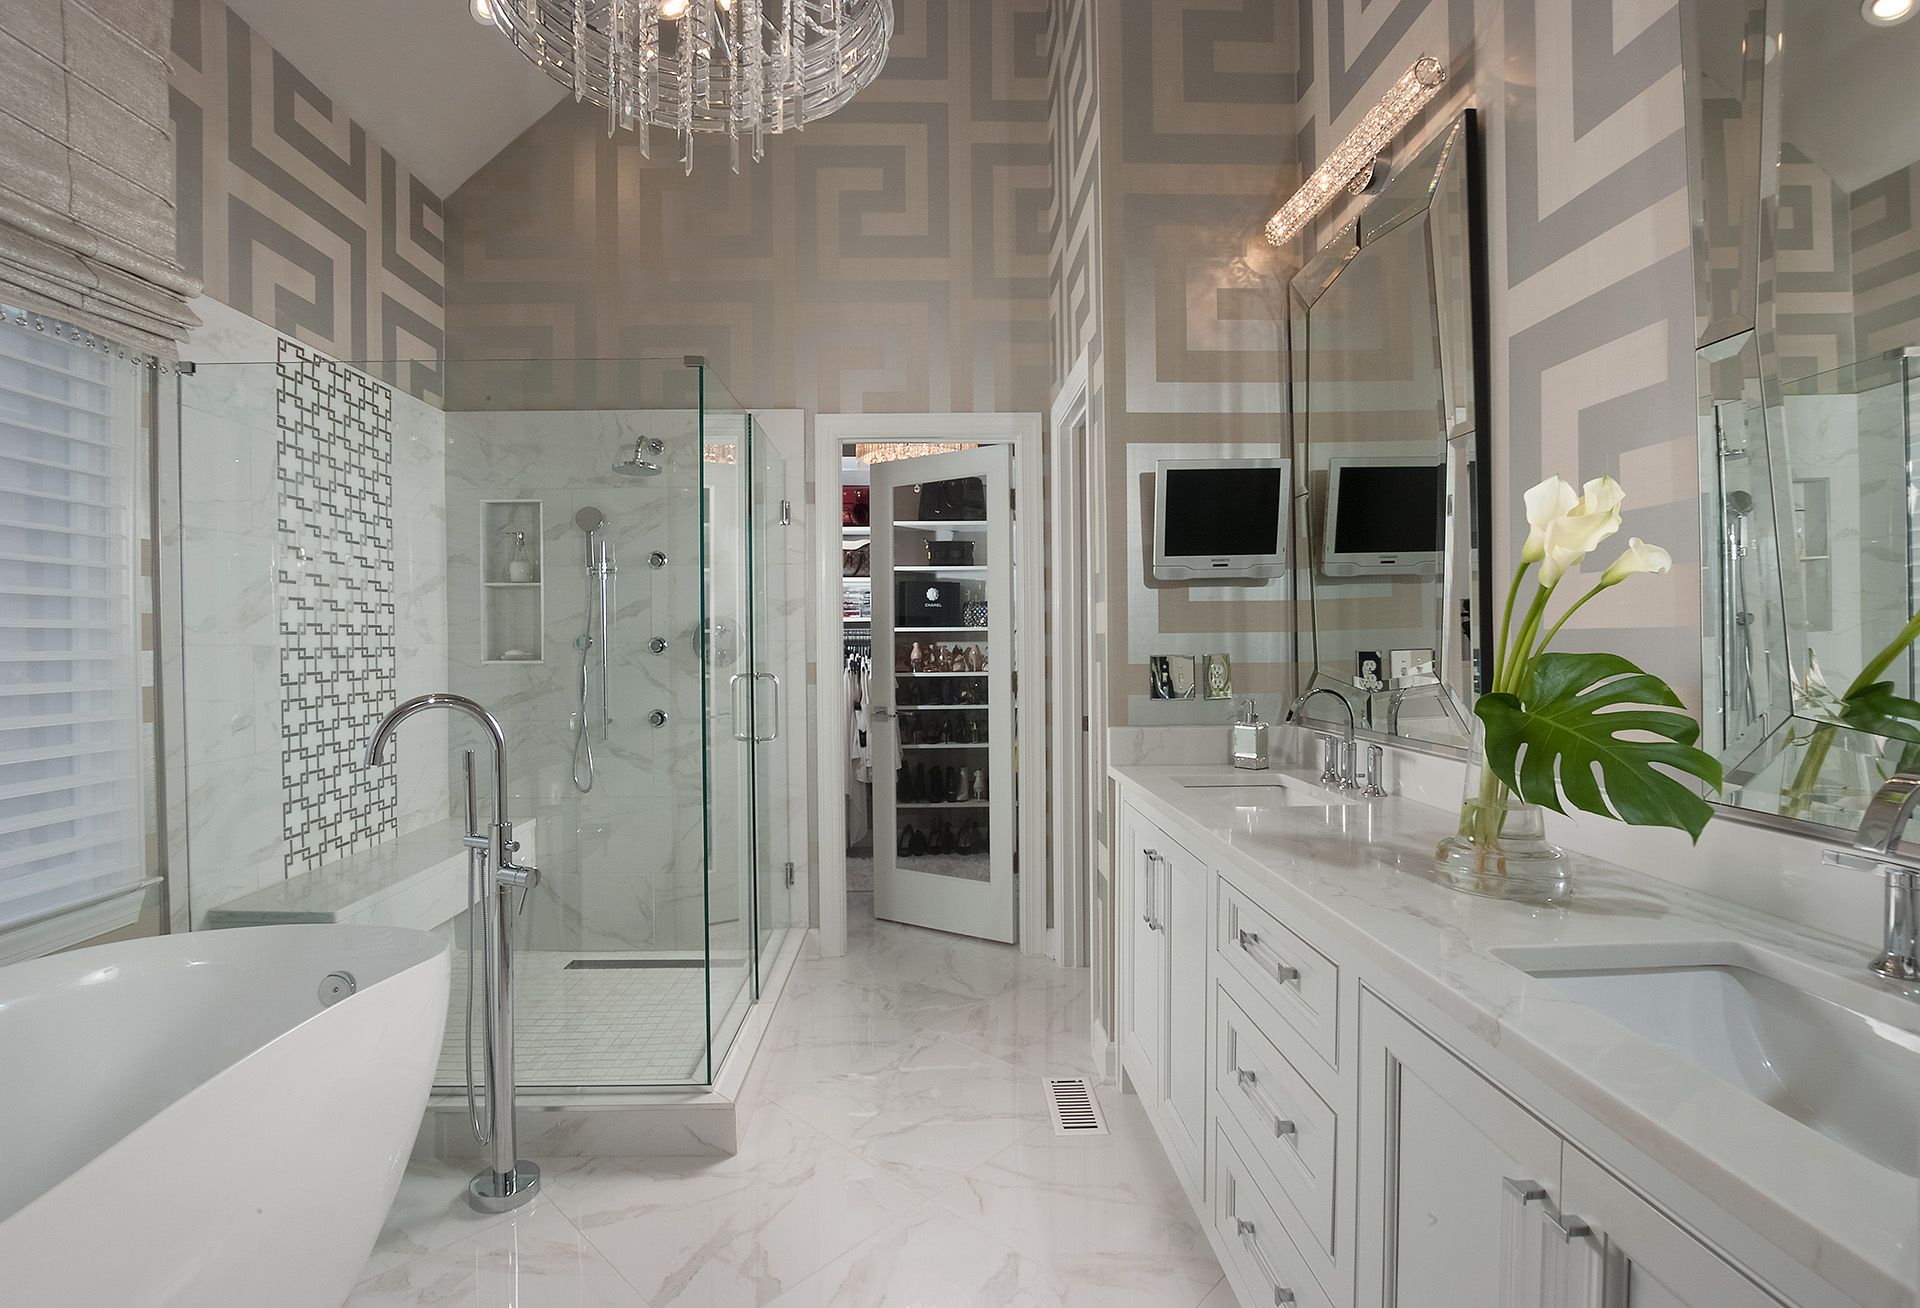 Luxurious bathroom with wallpaper